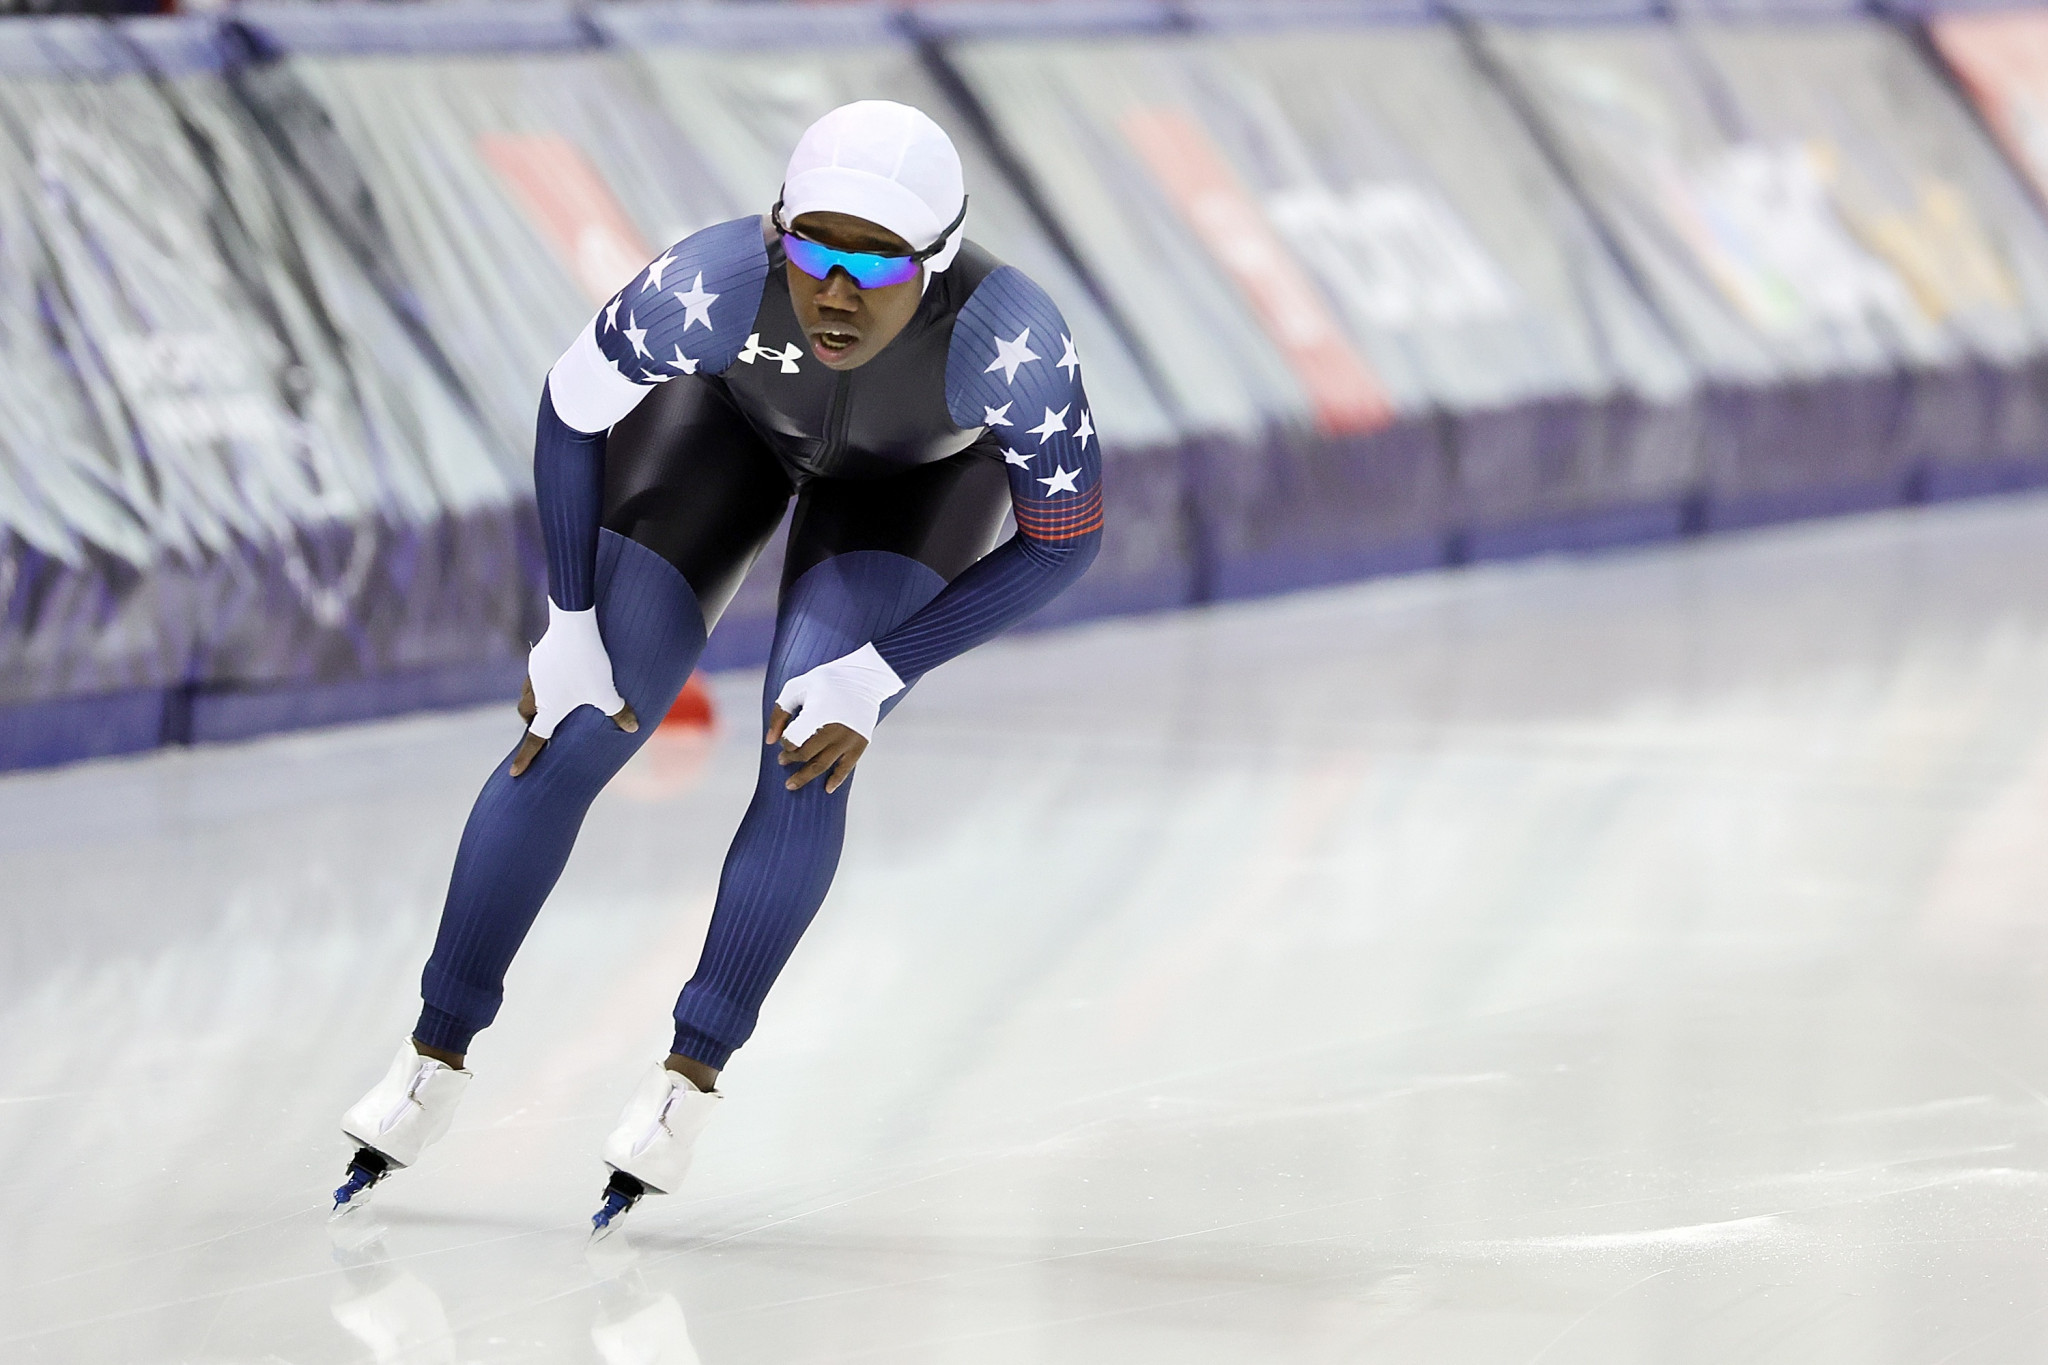 World speed skating number one Jackson could miss Beijing 2022 after trials stumble